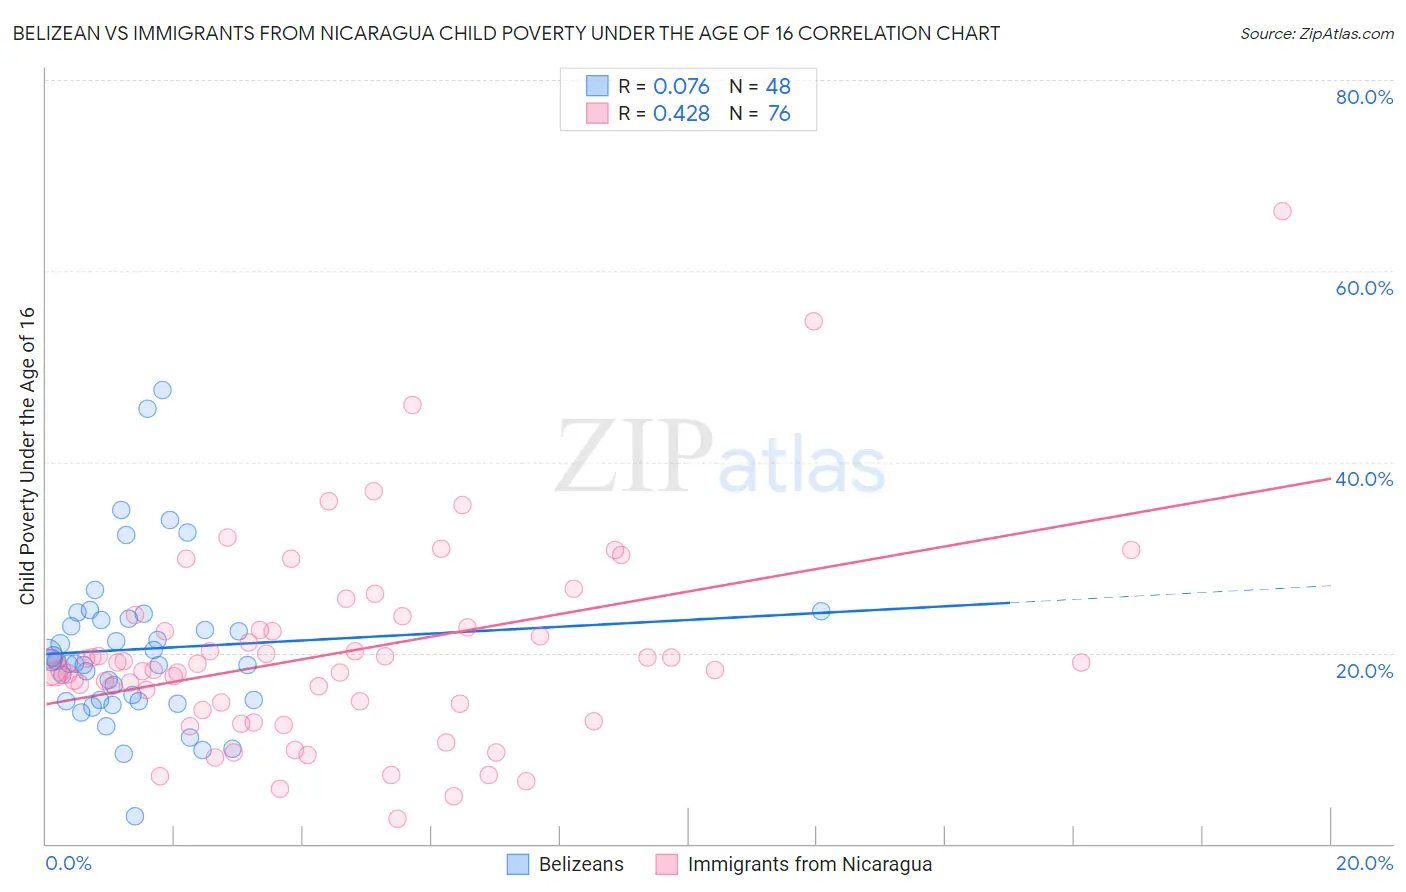 Belizean vs Immigrants from Nicaragua Child Poverty Under the Age of 16